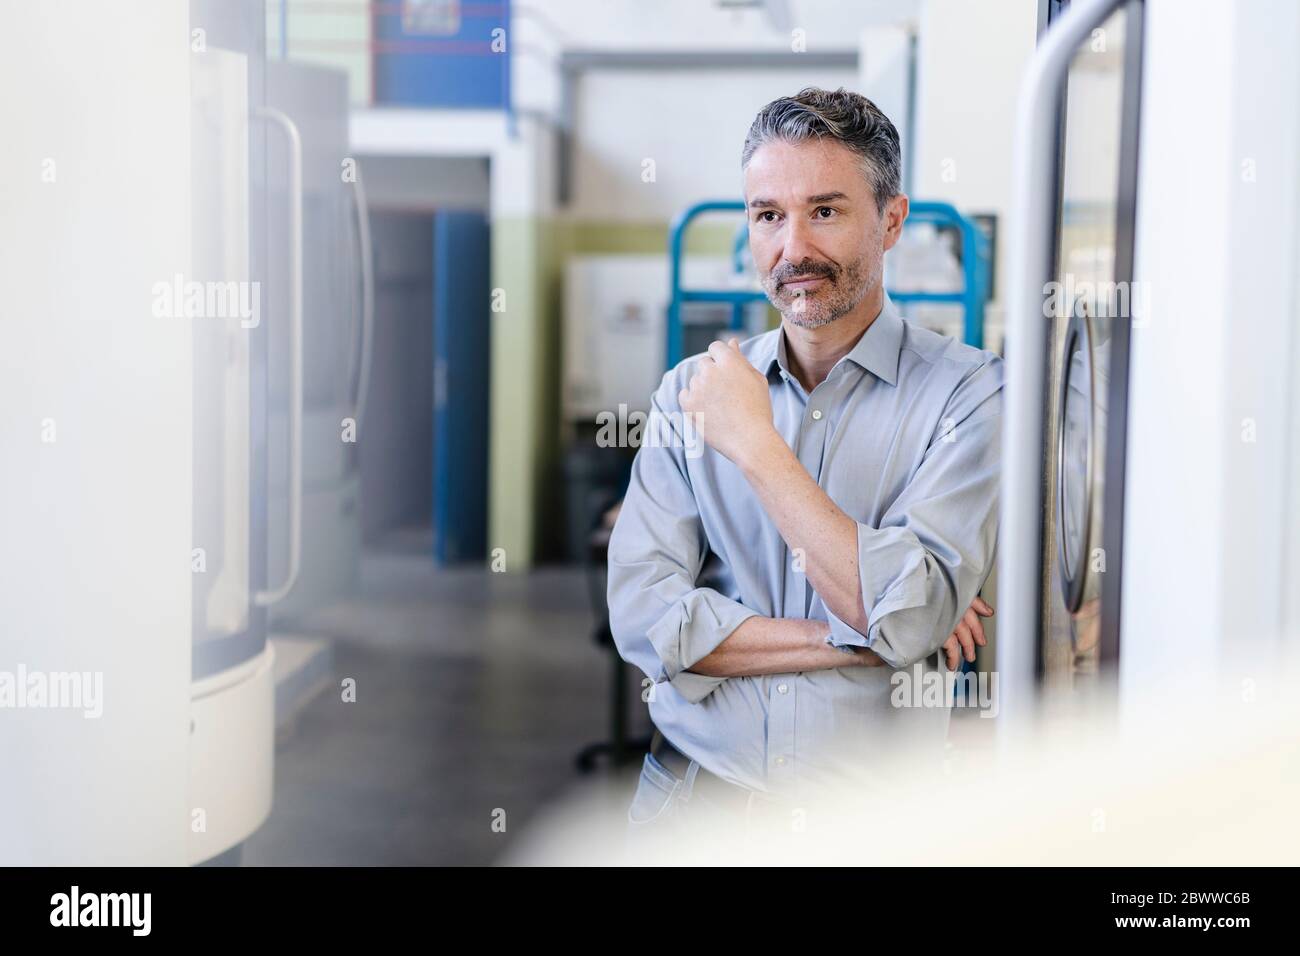 Competent businessman working in his company, portrait Stock Photo